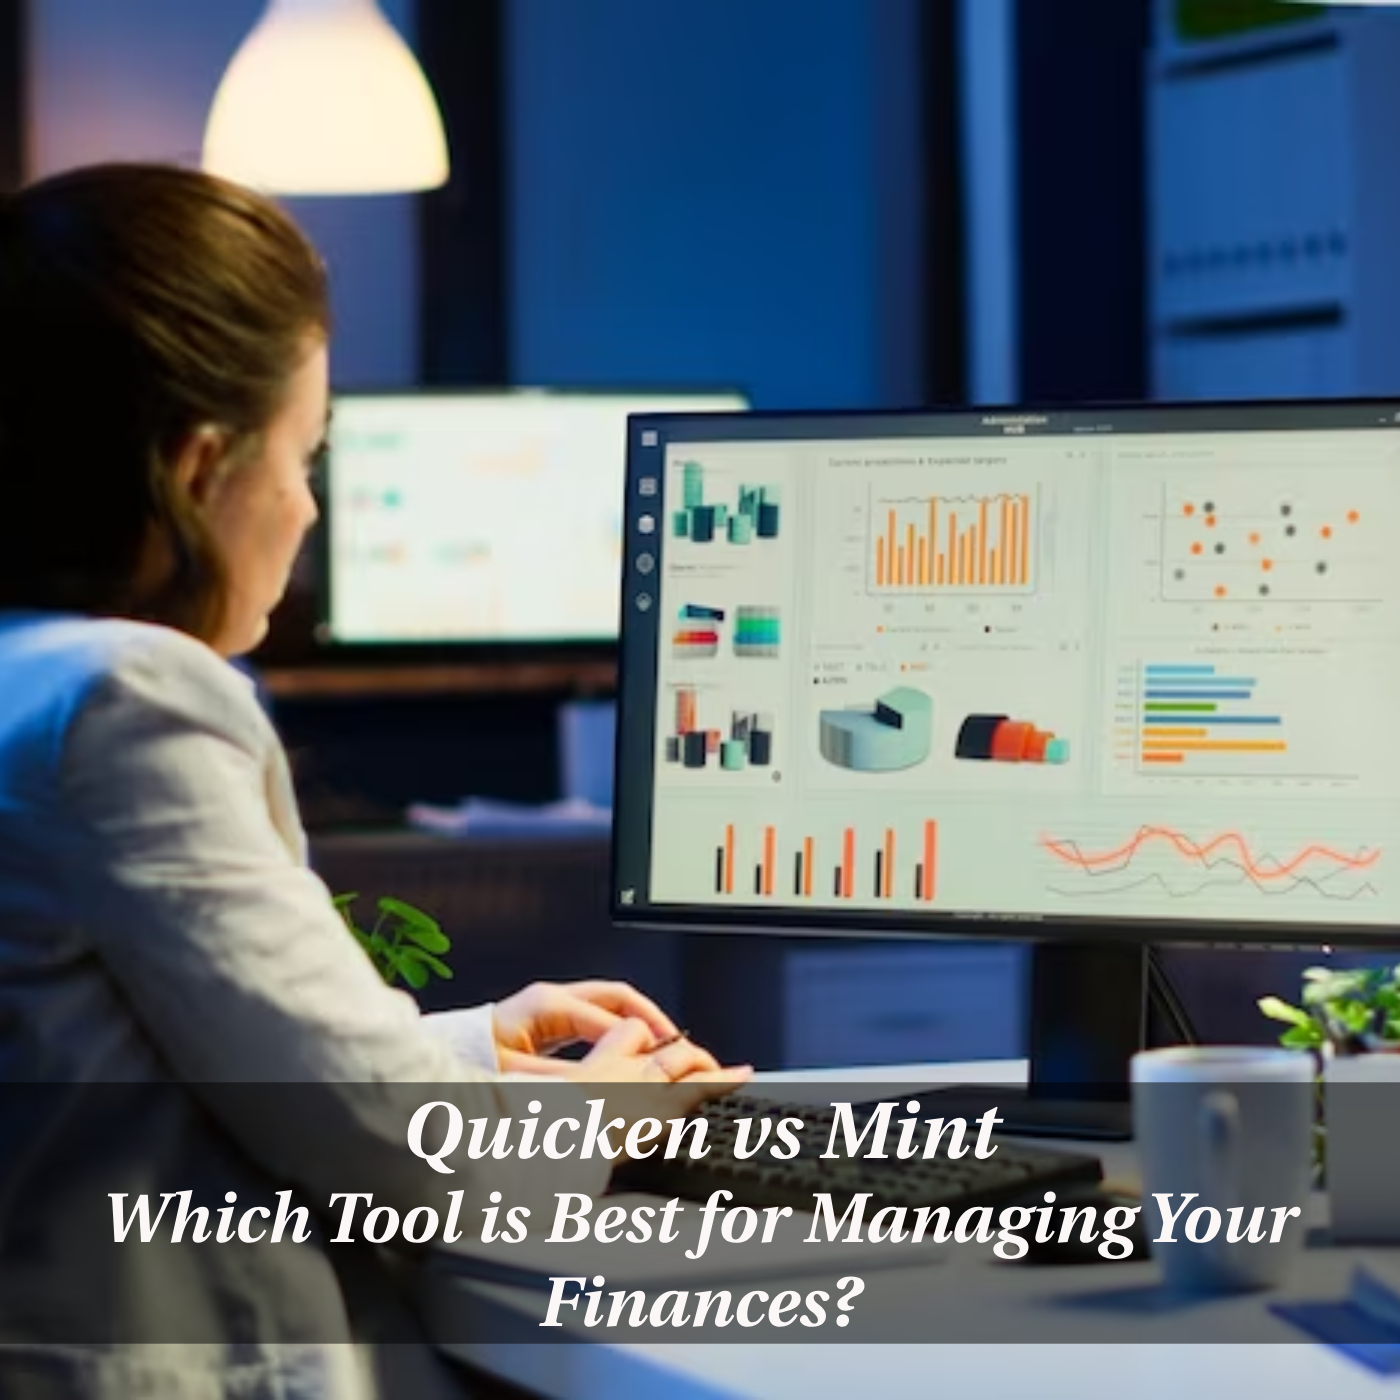 Quicken vs Mint: Which Tool is Best for Managing Your Finances?